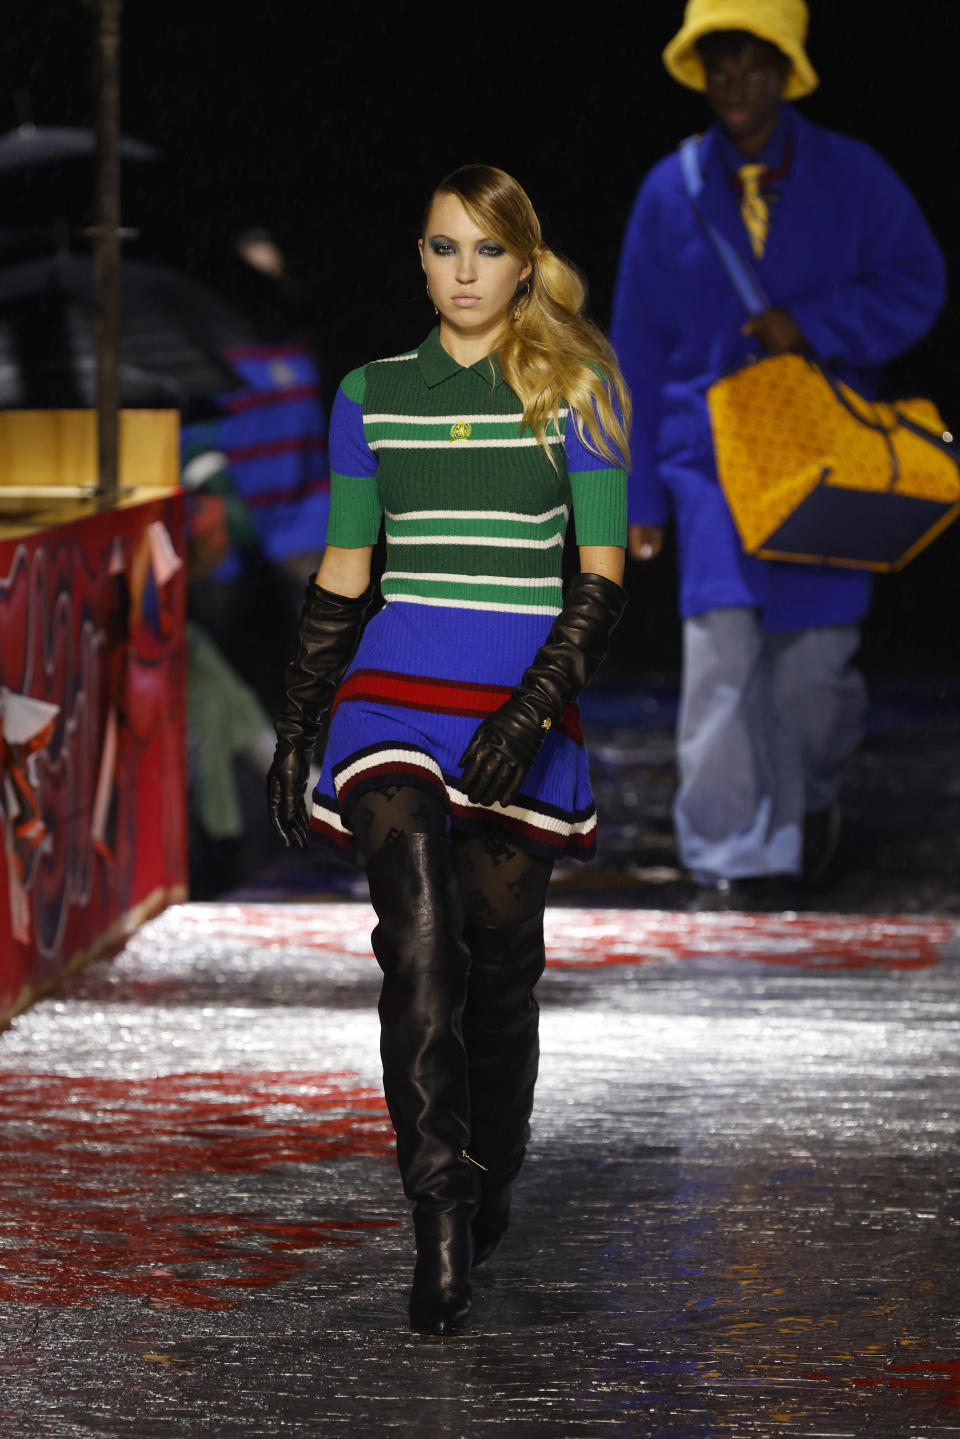 Lila Grace Moss-Hack models the Tommy Hilfiger Fall 2022 collection during Fashion Week, Sunday, Sept. 11, 2022, in New York. (AP Photo/Jason DeCrow)